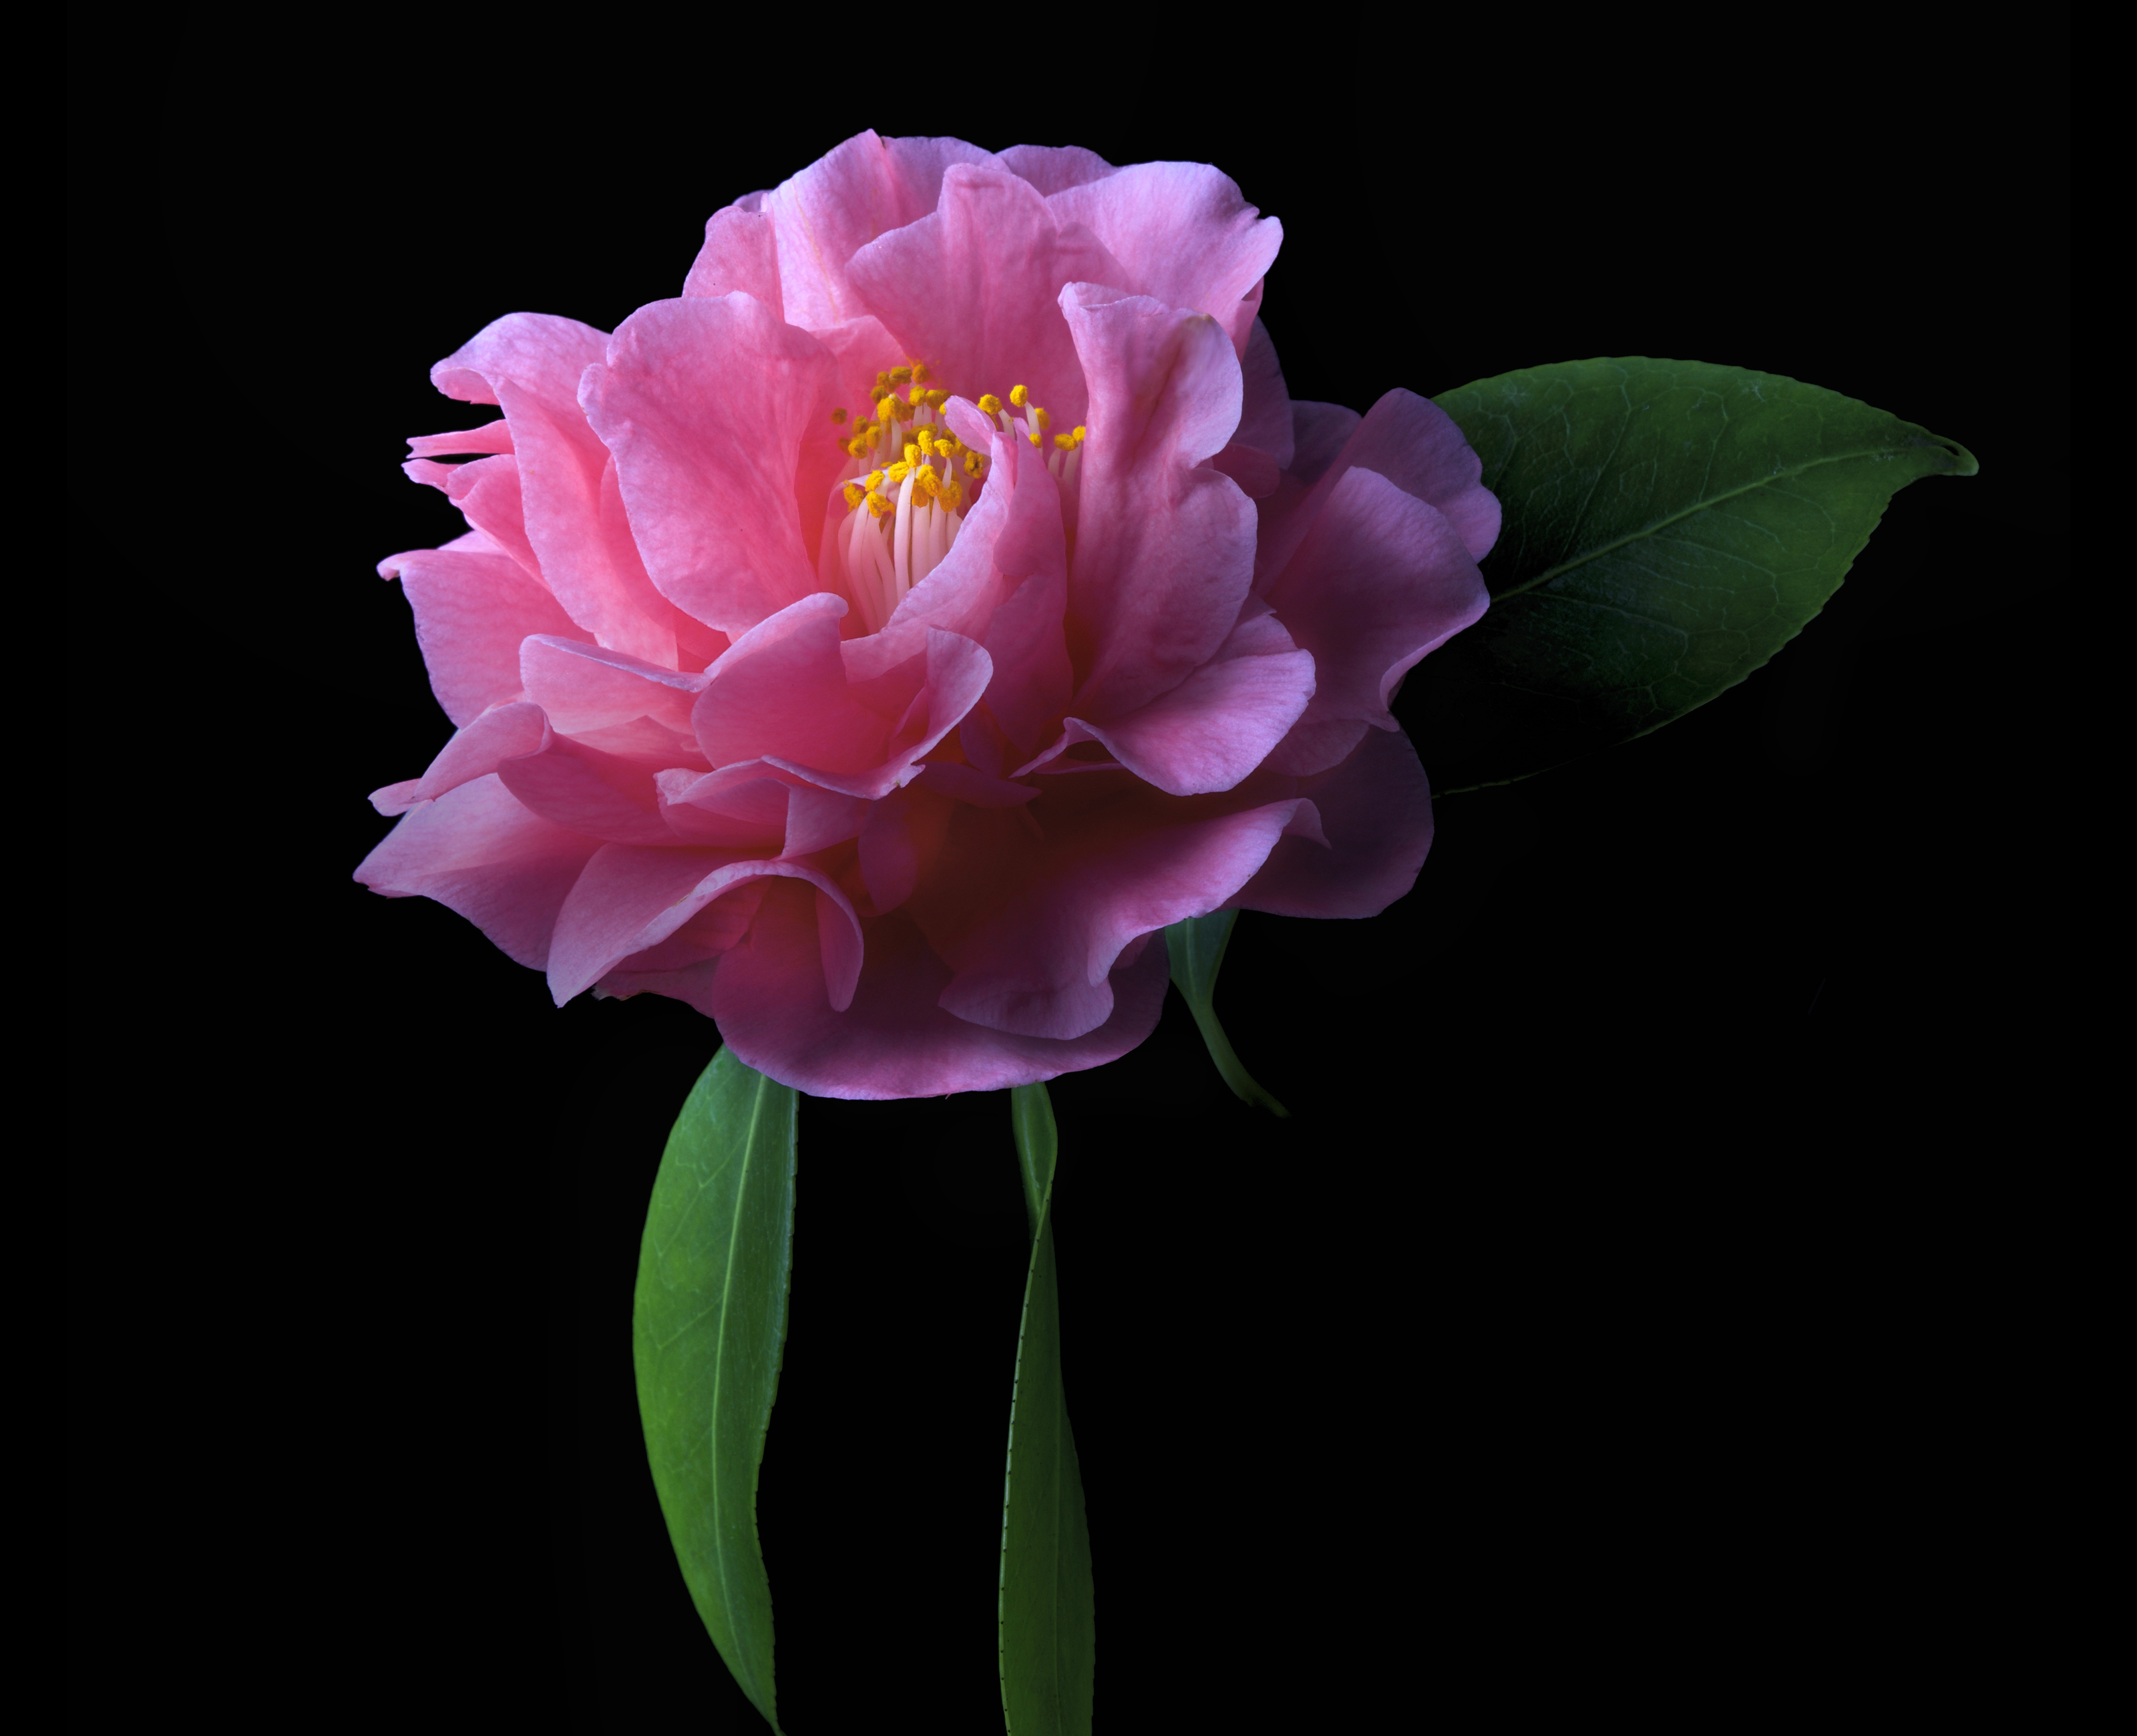 wallpapers earth, camellia, close up, flower, pink flower, flowers